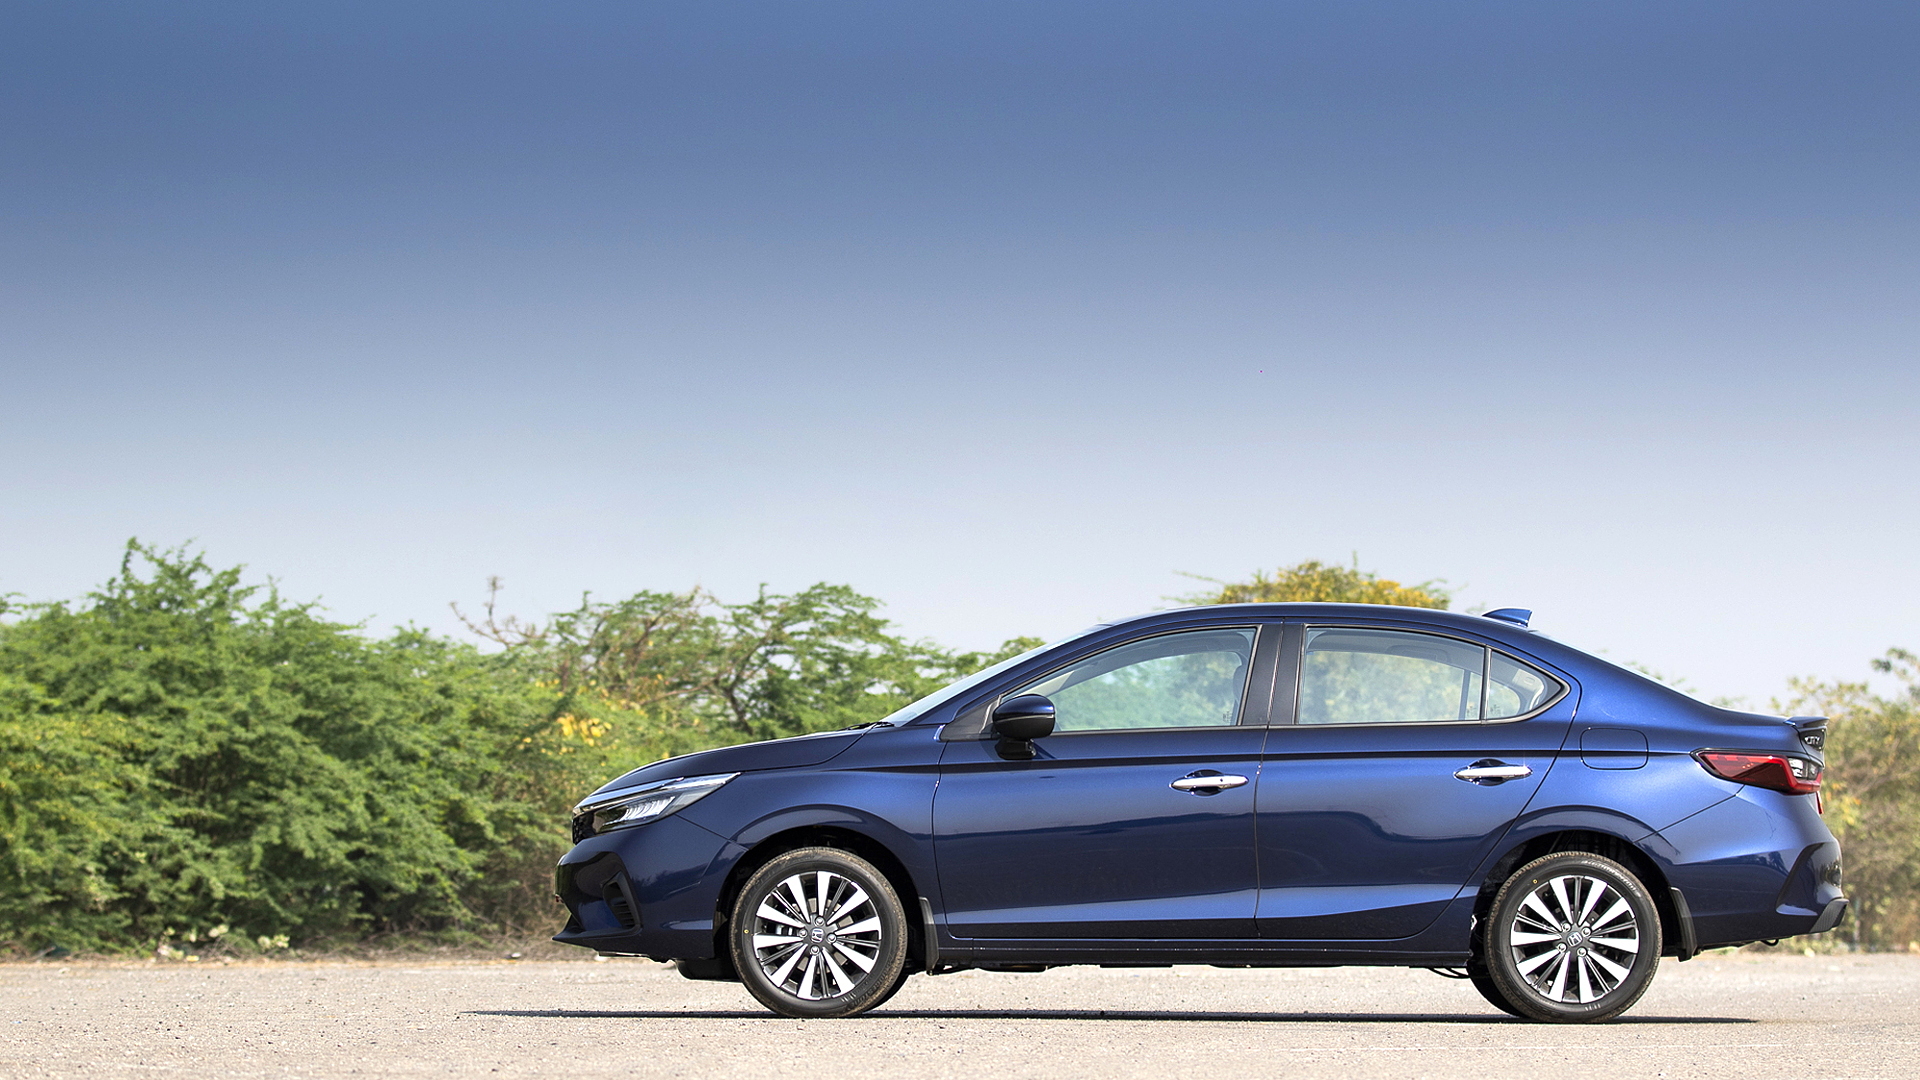 Honda City, Amaze Get Discounts of up to Rs 73,000 in July